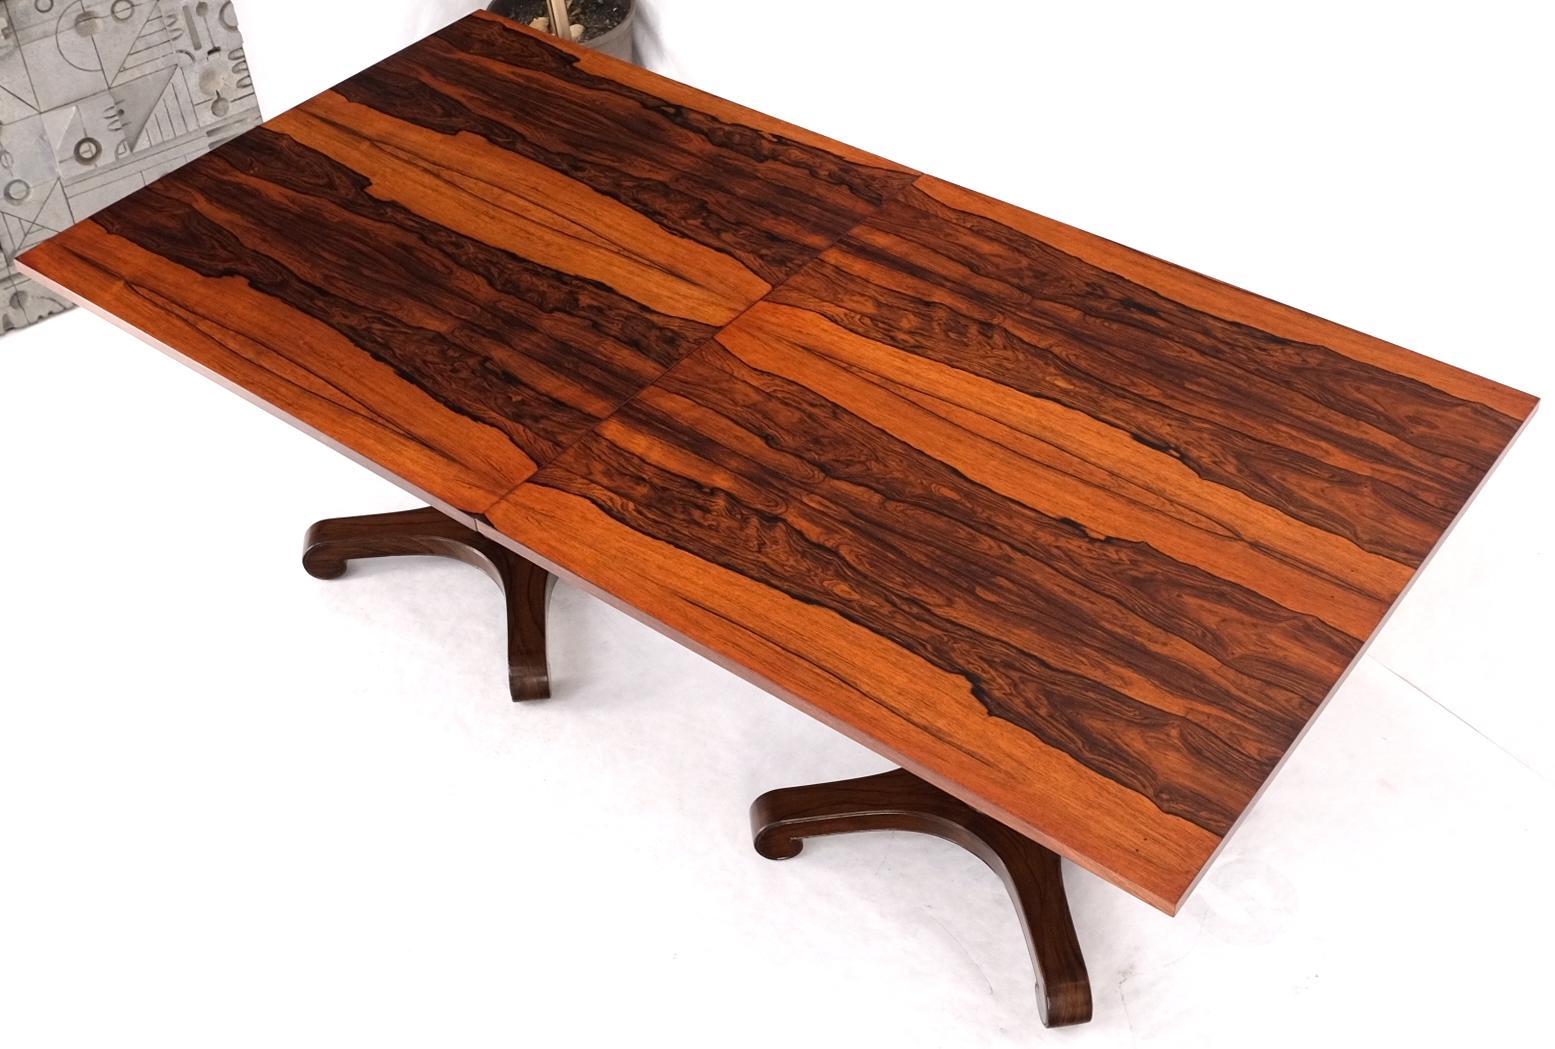 Two part rosewood two pedestals dining table game table mint.
Dining table consisting of two came cafe tables that look together to form one dining table and can be used separately. Mint vintage refinished condition. Extended measurement reads: